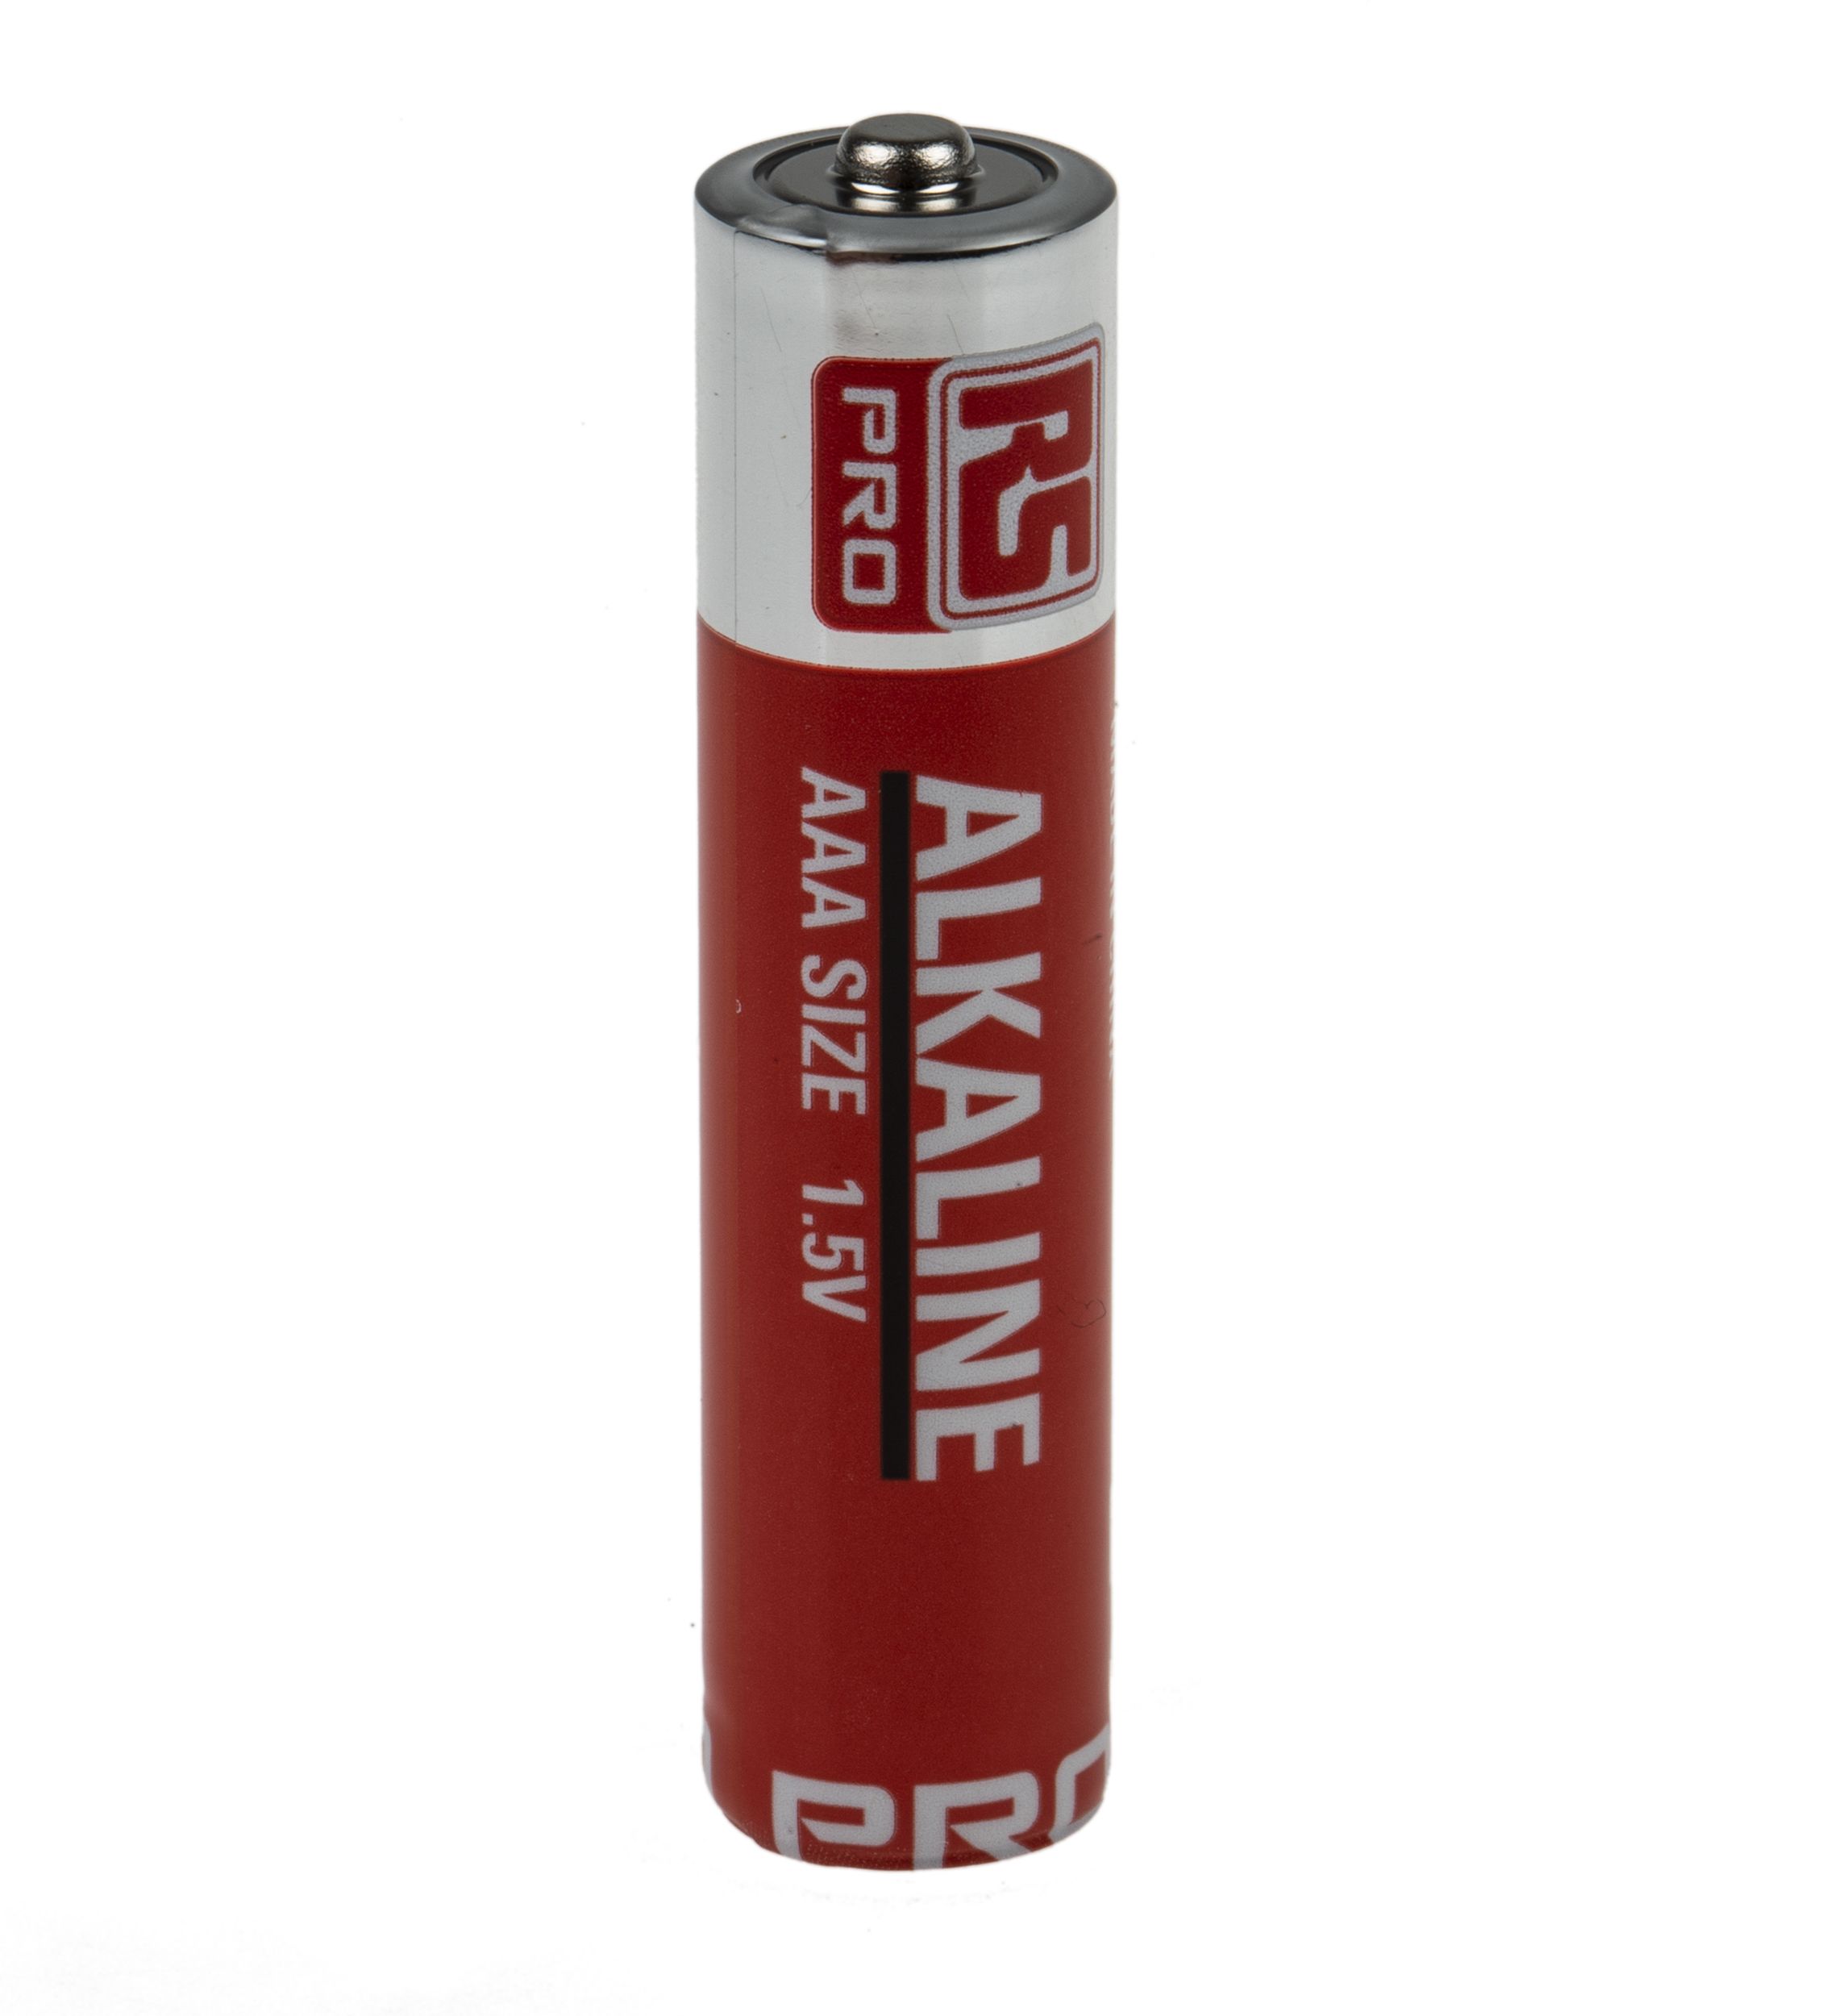 RS PRO Alkaline AAA Battery 1.5V, 100 Pack